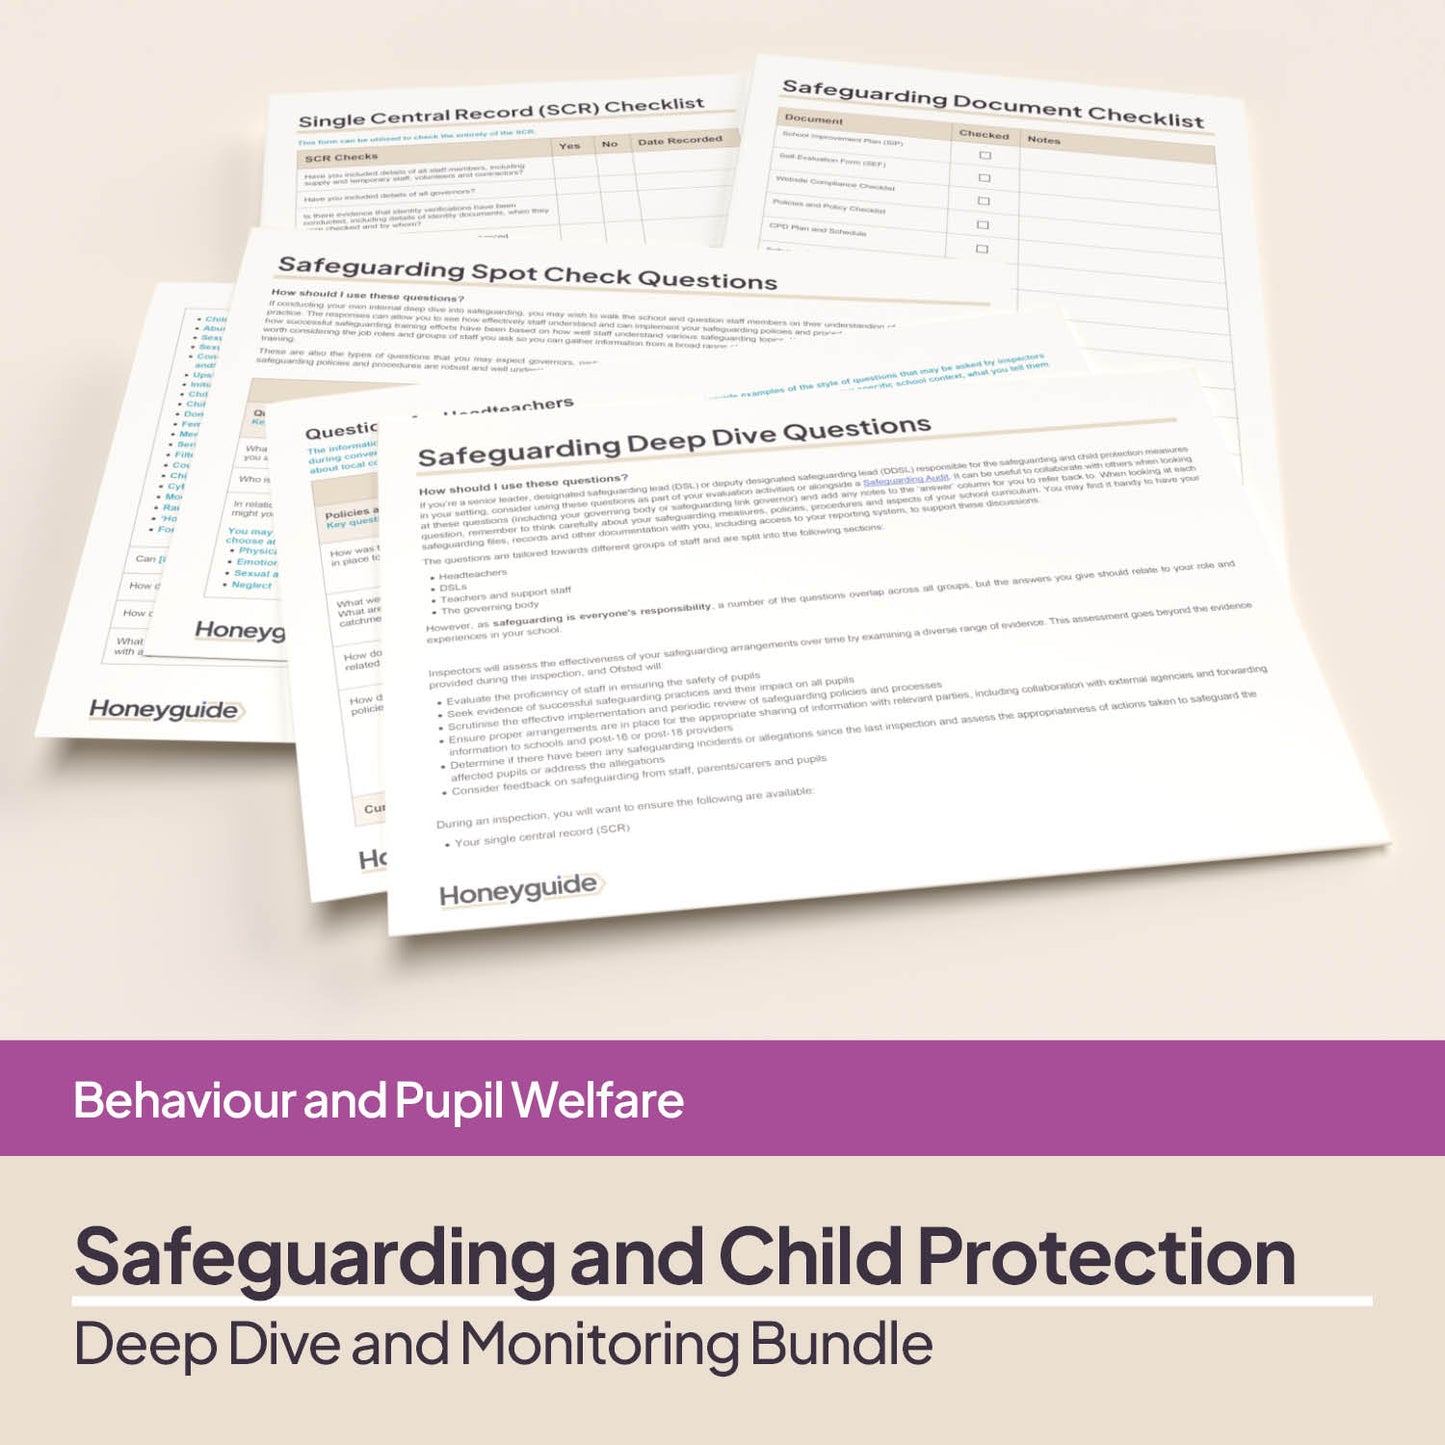 Safeguarding and Child Protection Deep Dive